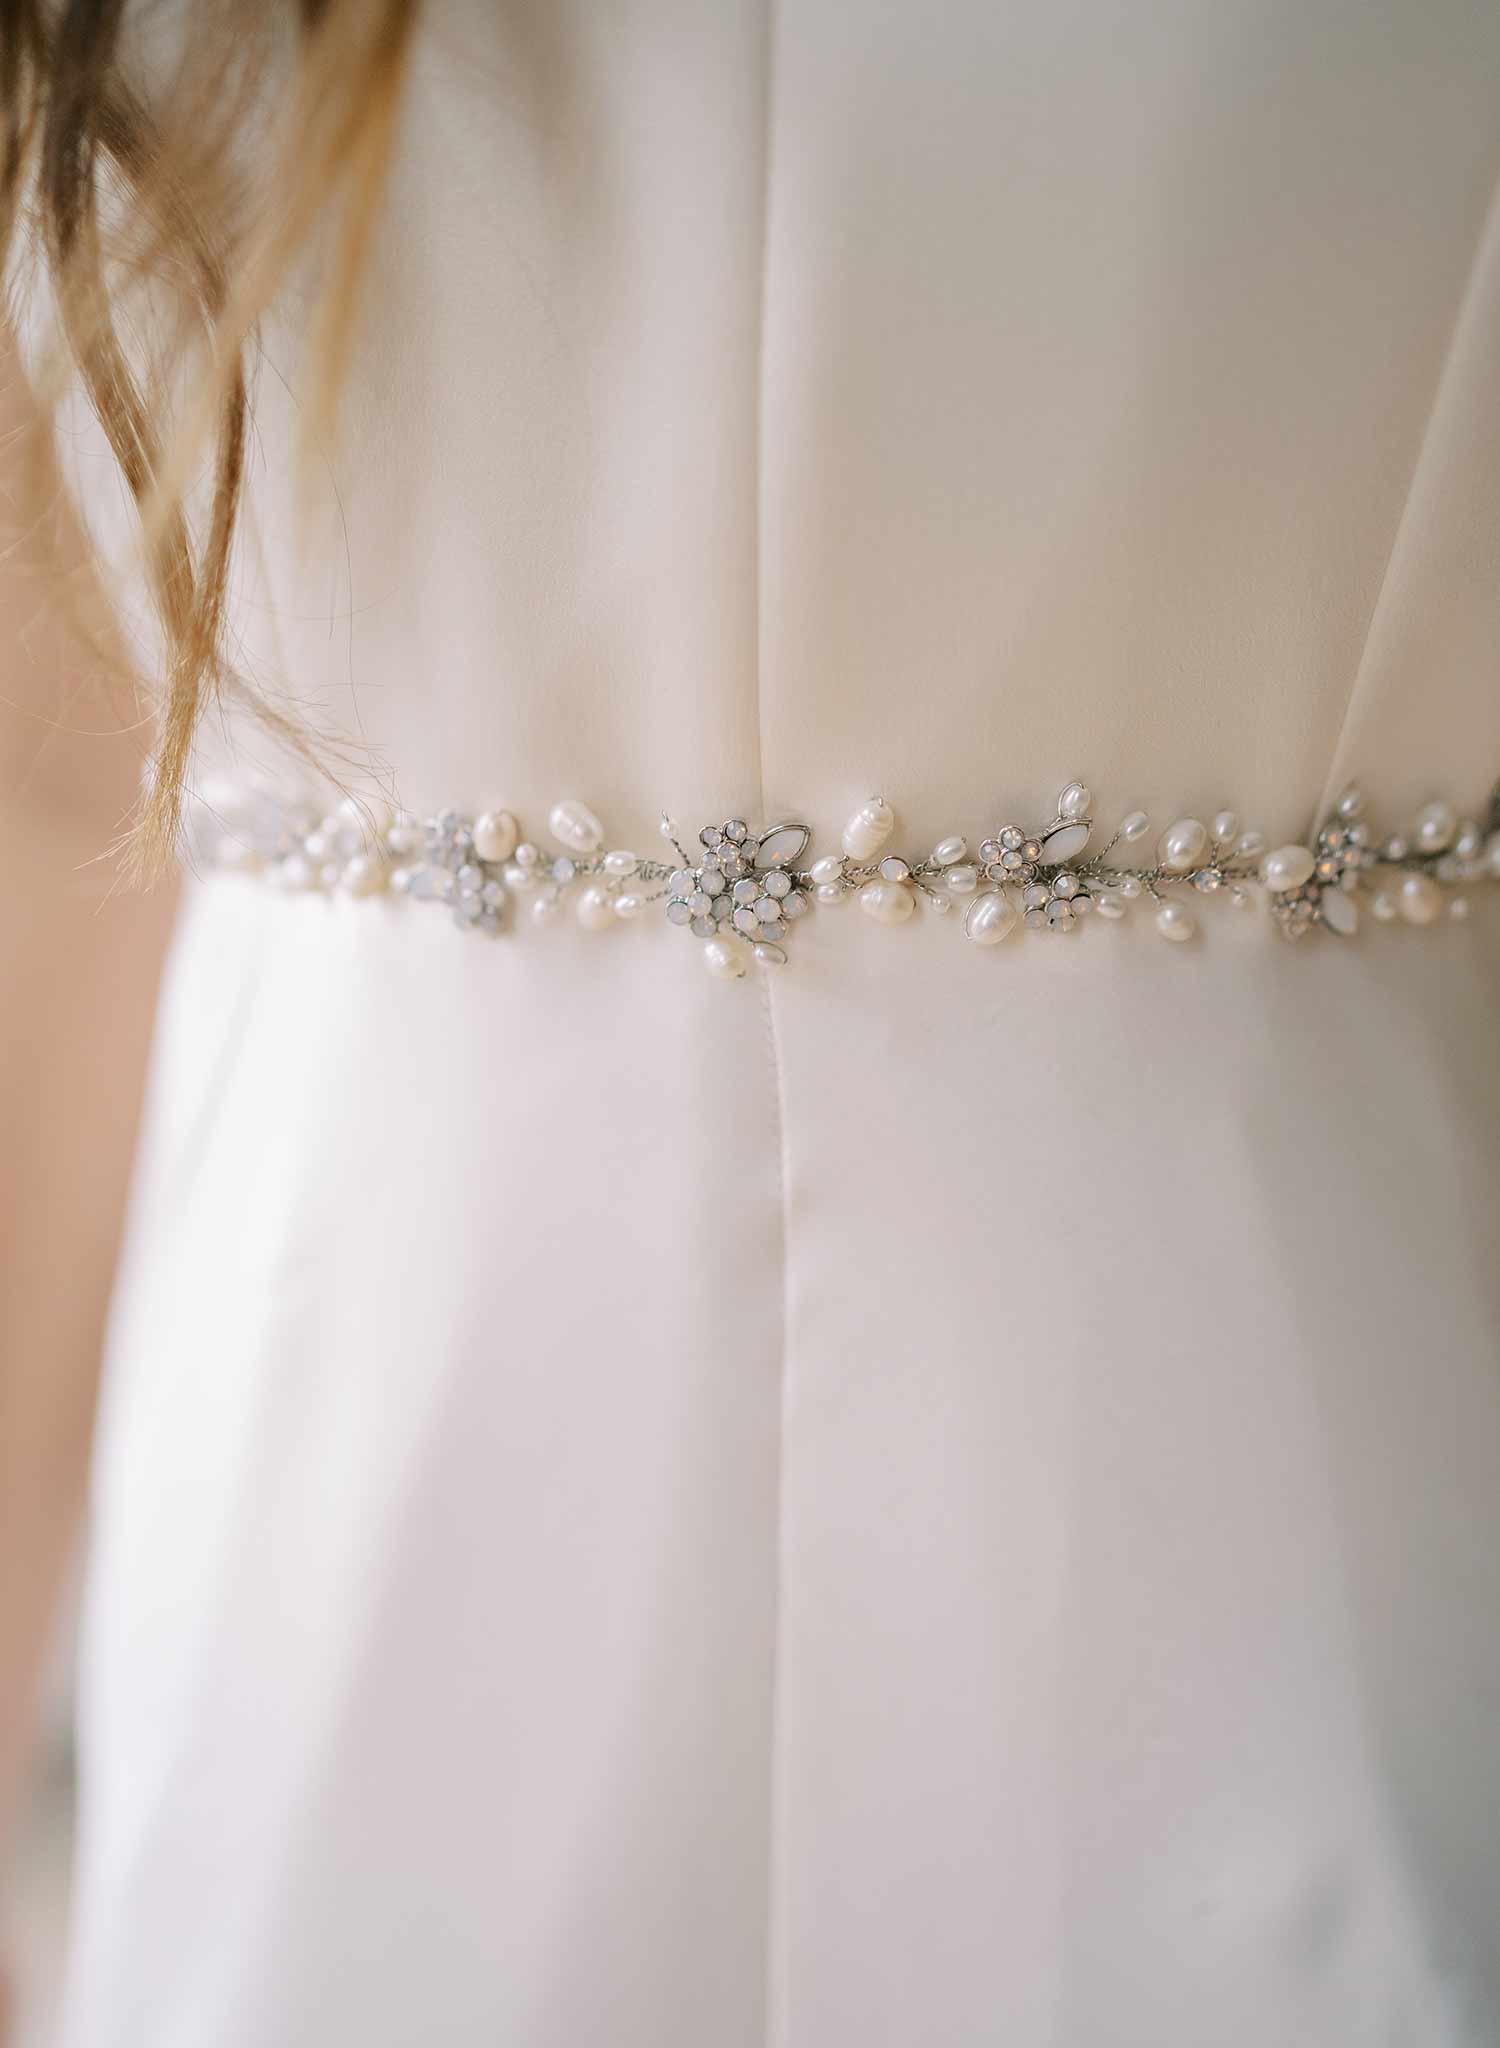 Simple pearl and opal bridal sash - Style #2482